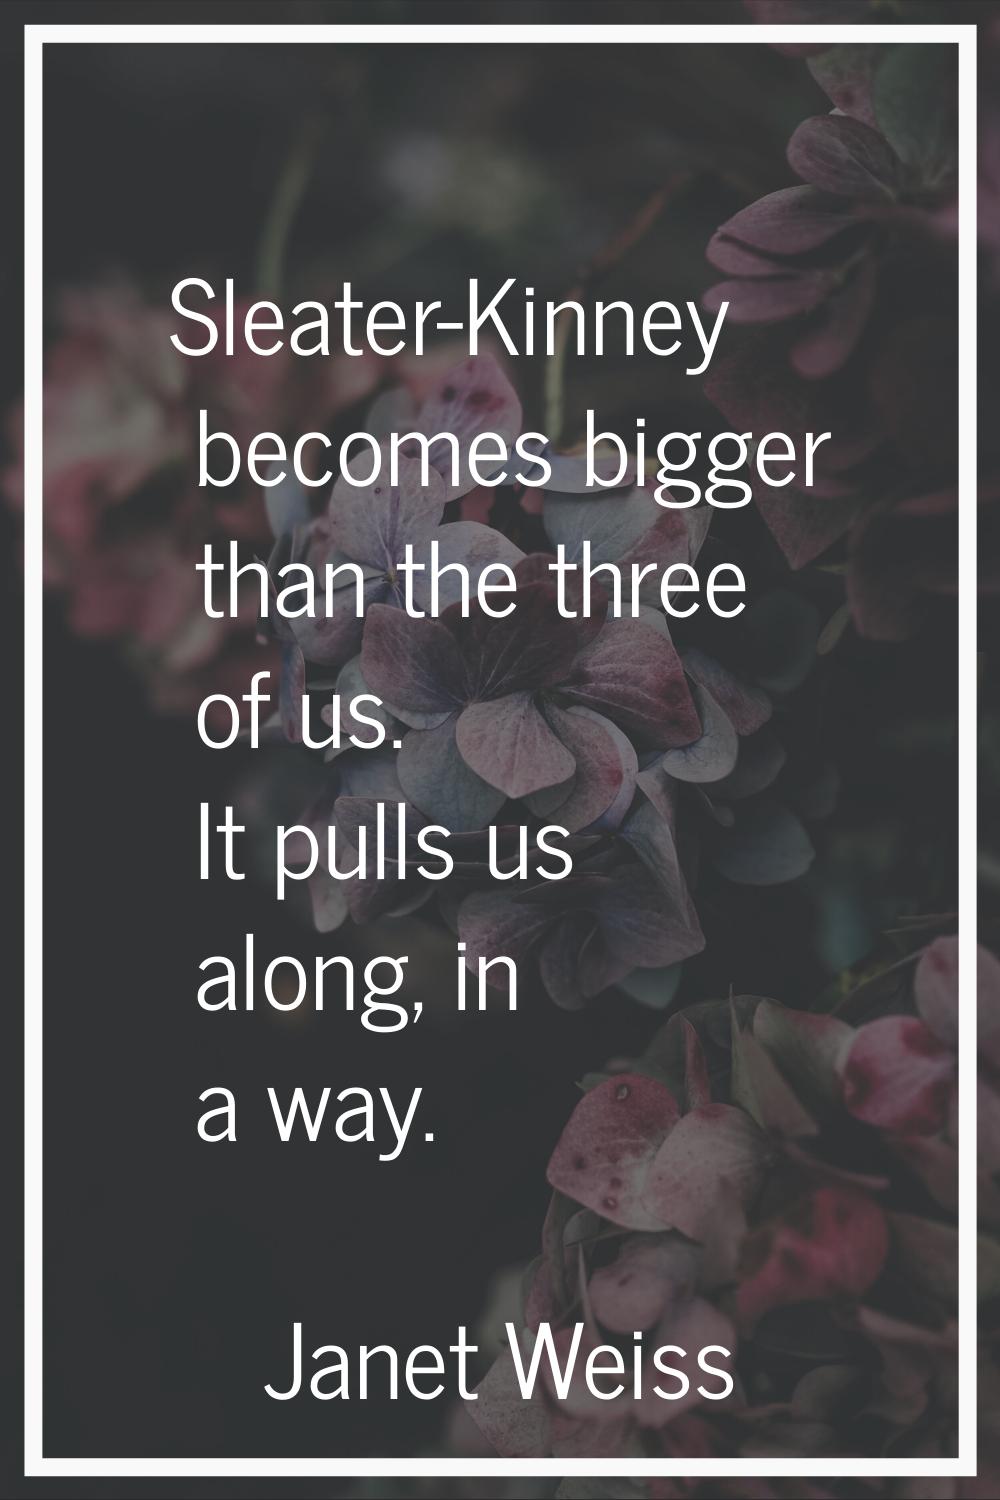 Sleater-Kinney becomes bigger than the three of us. It pulls us along, in a way.